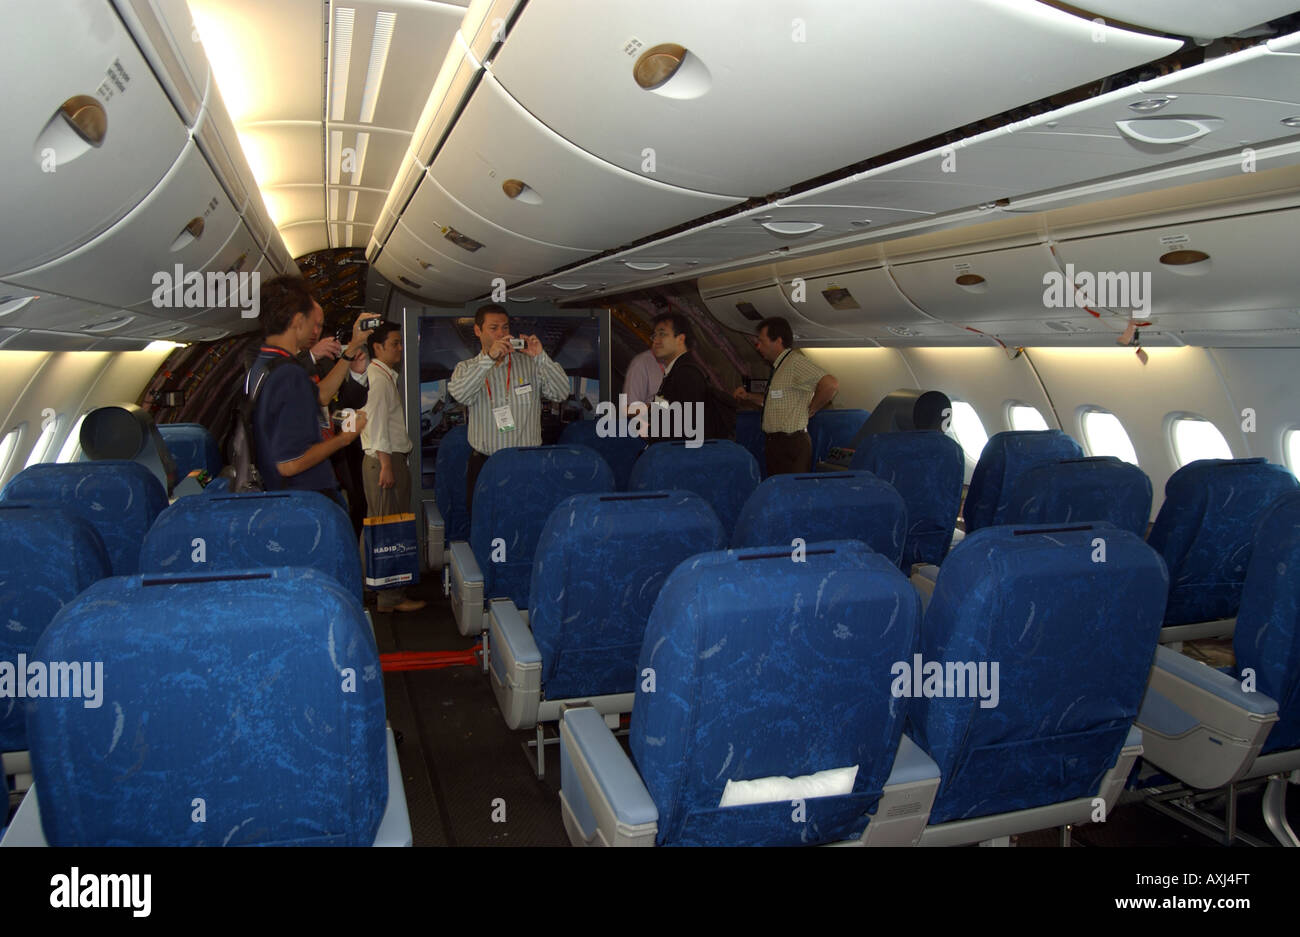 Airbus A380-800 cabin. Stock Photo